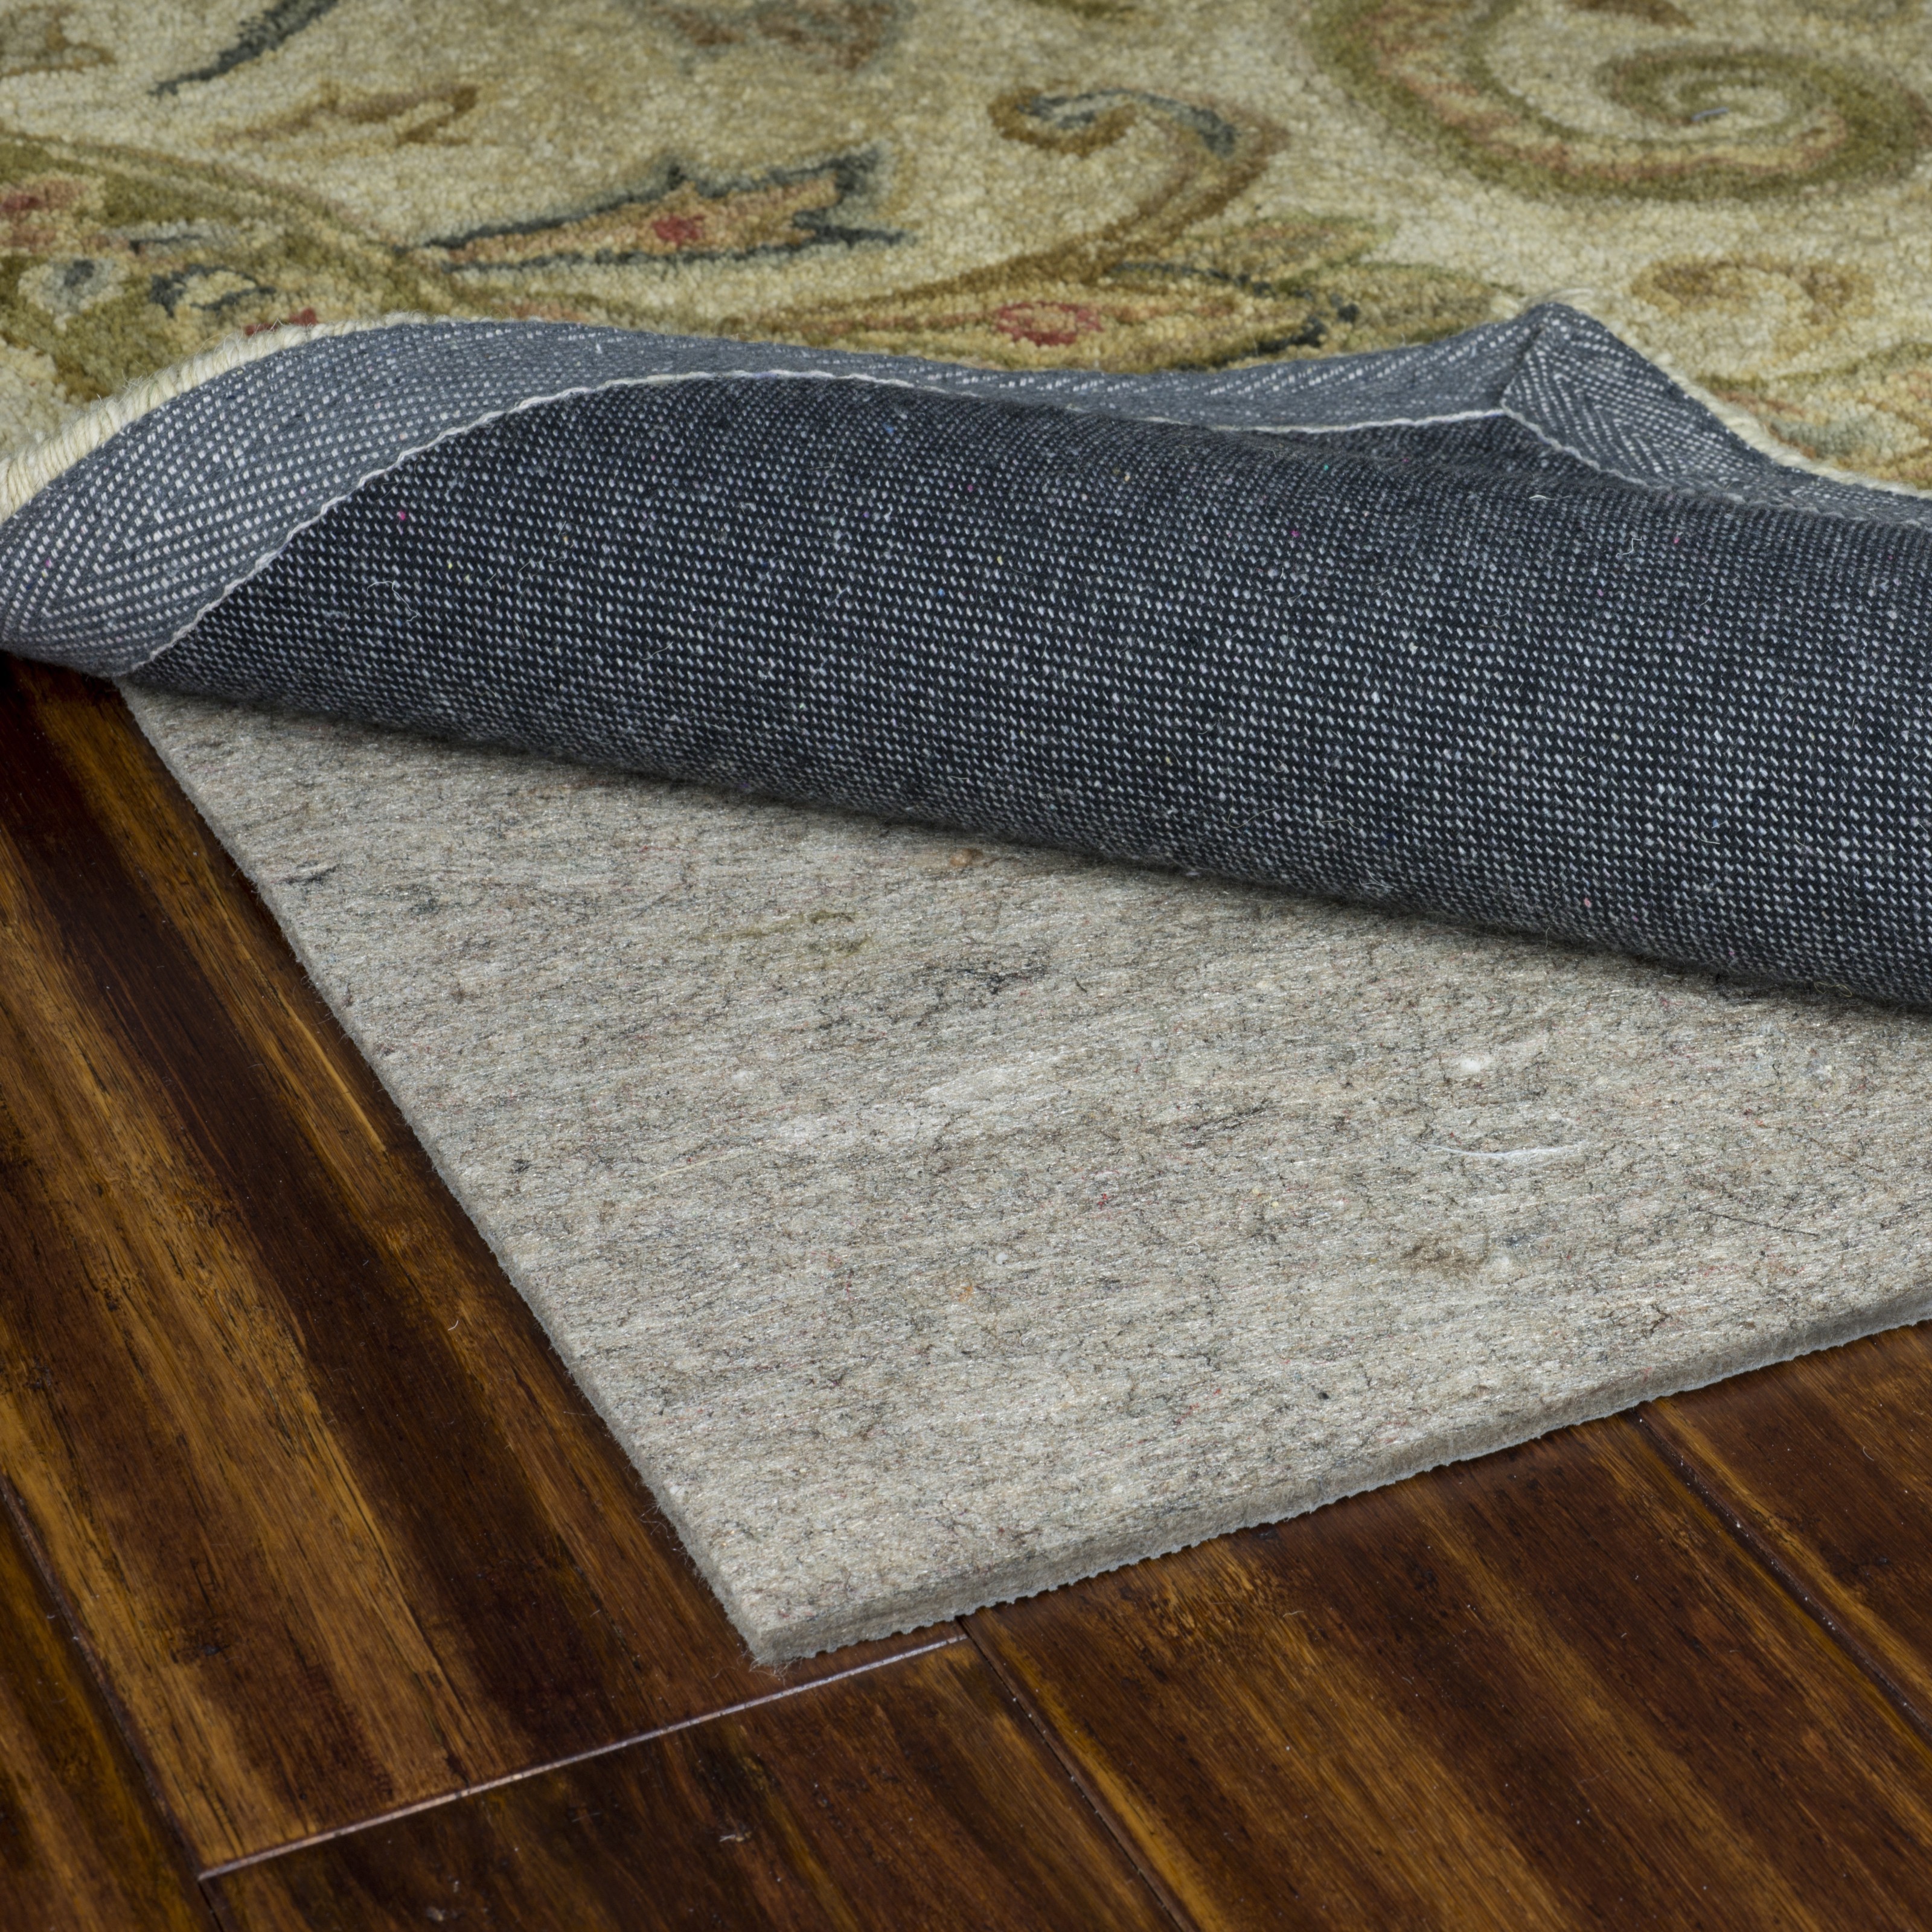 Shop Deluxe Grip Multi Surface Area Rug Pad On Sale Overstock